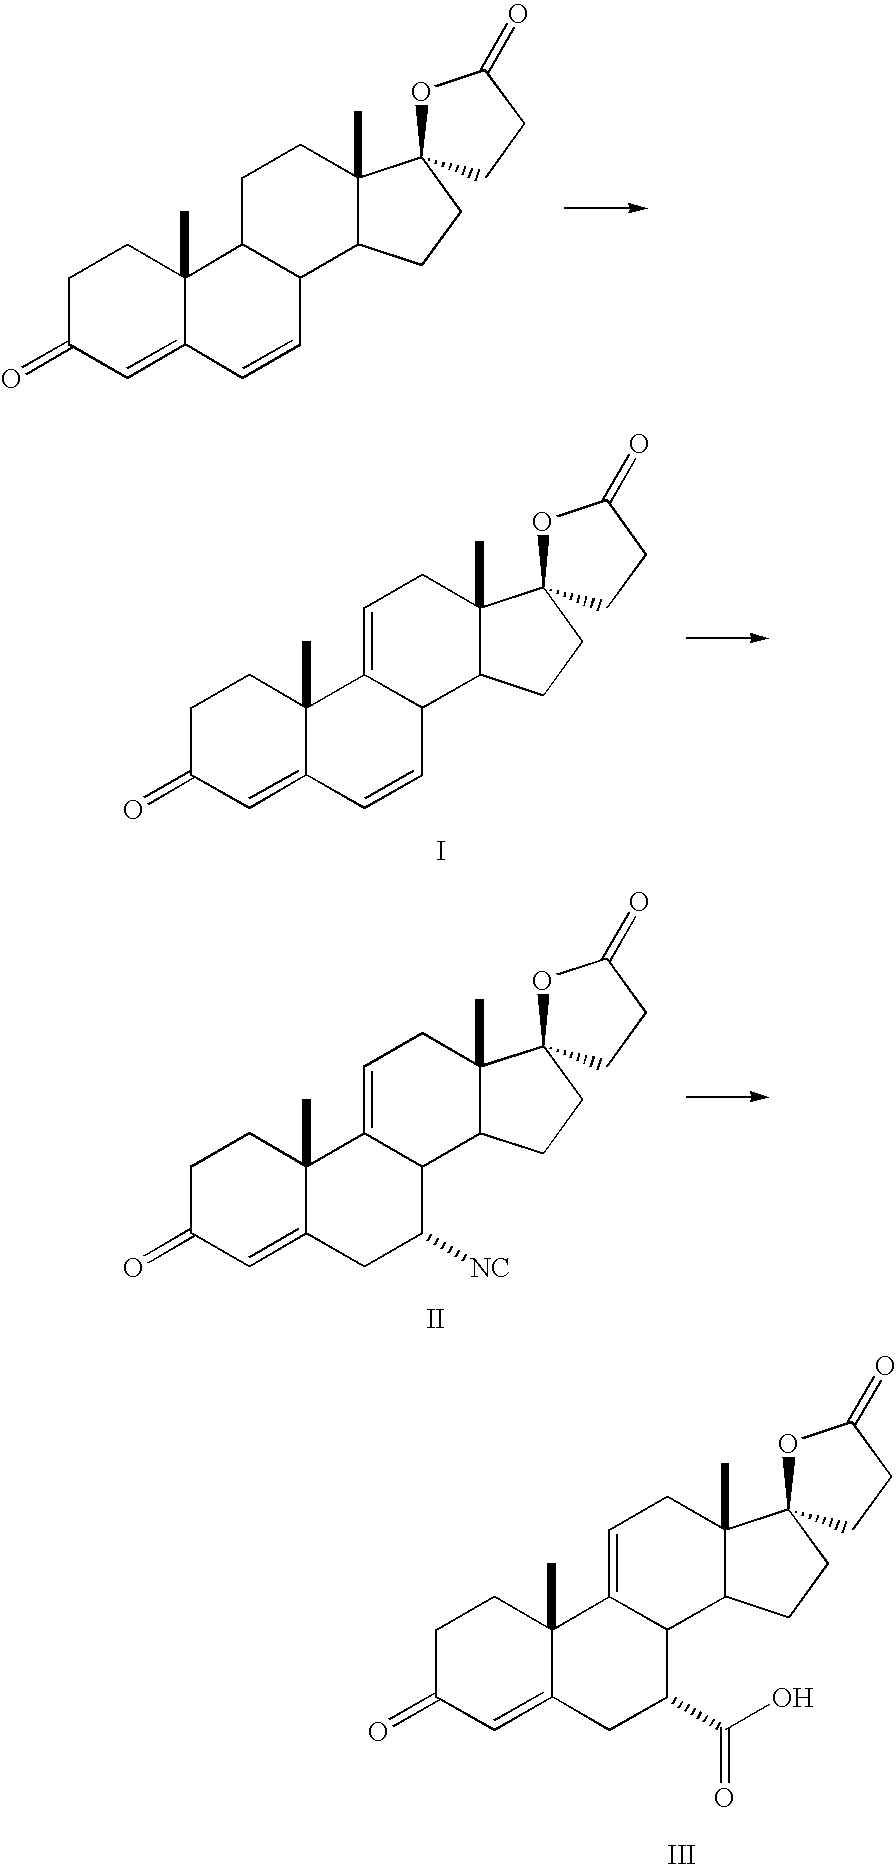 Process for the preparation and purification of eplerenone